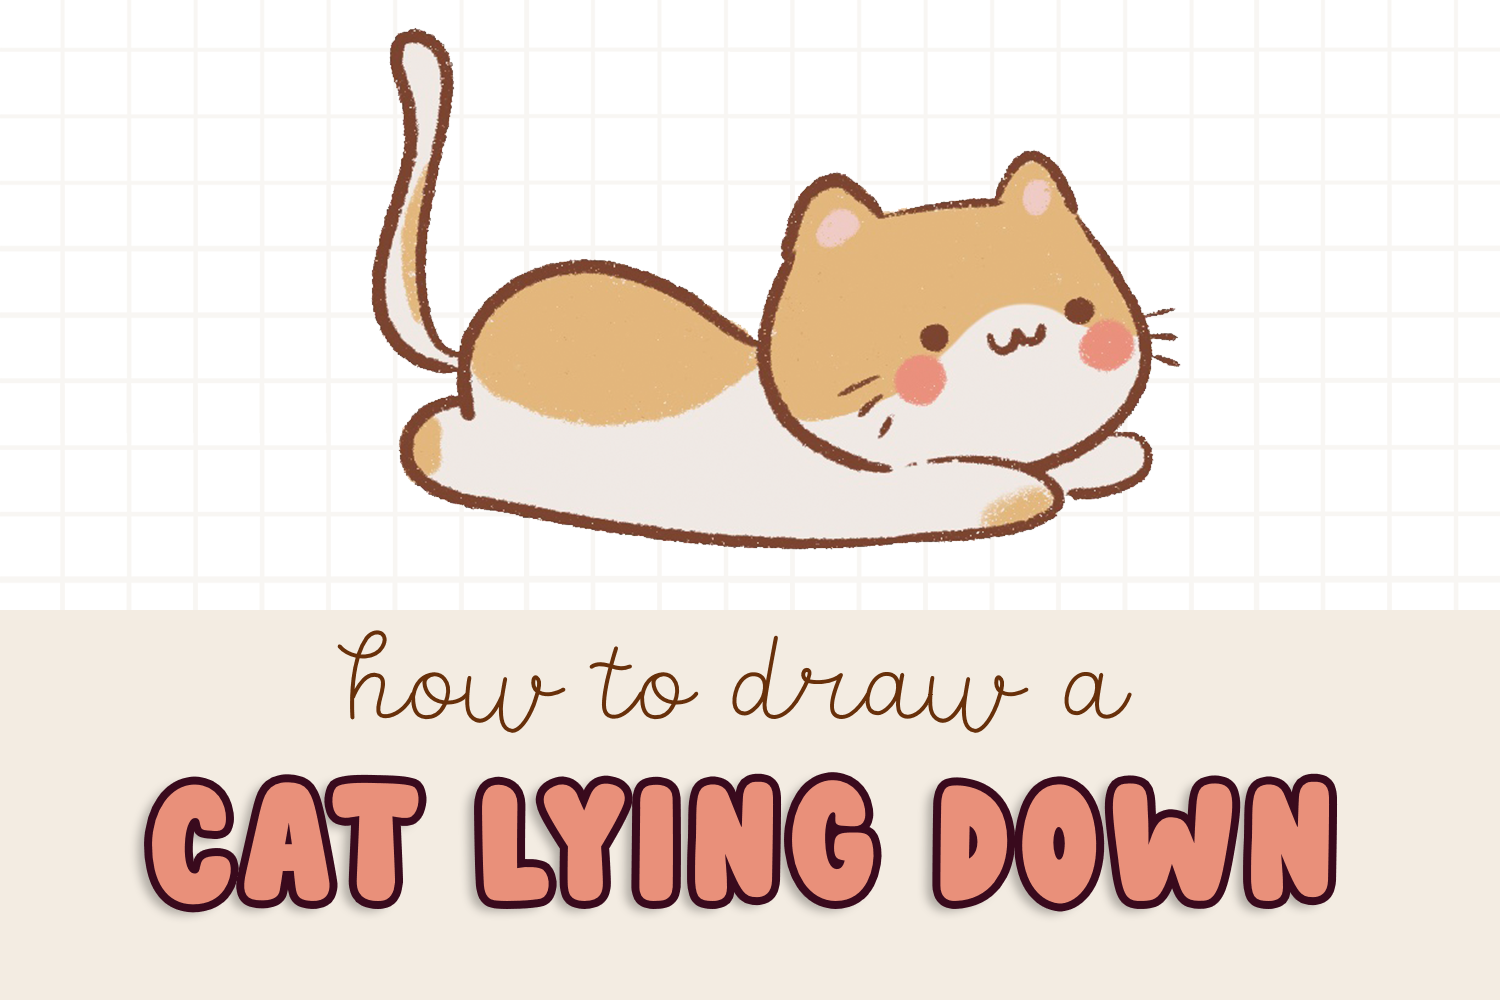 How to Draw a Cat Lying Down (Easy Beginner Guide)